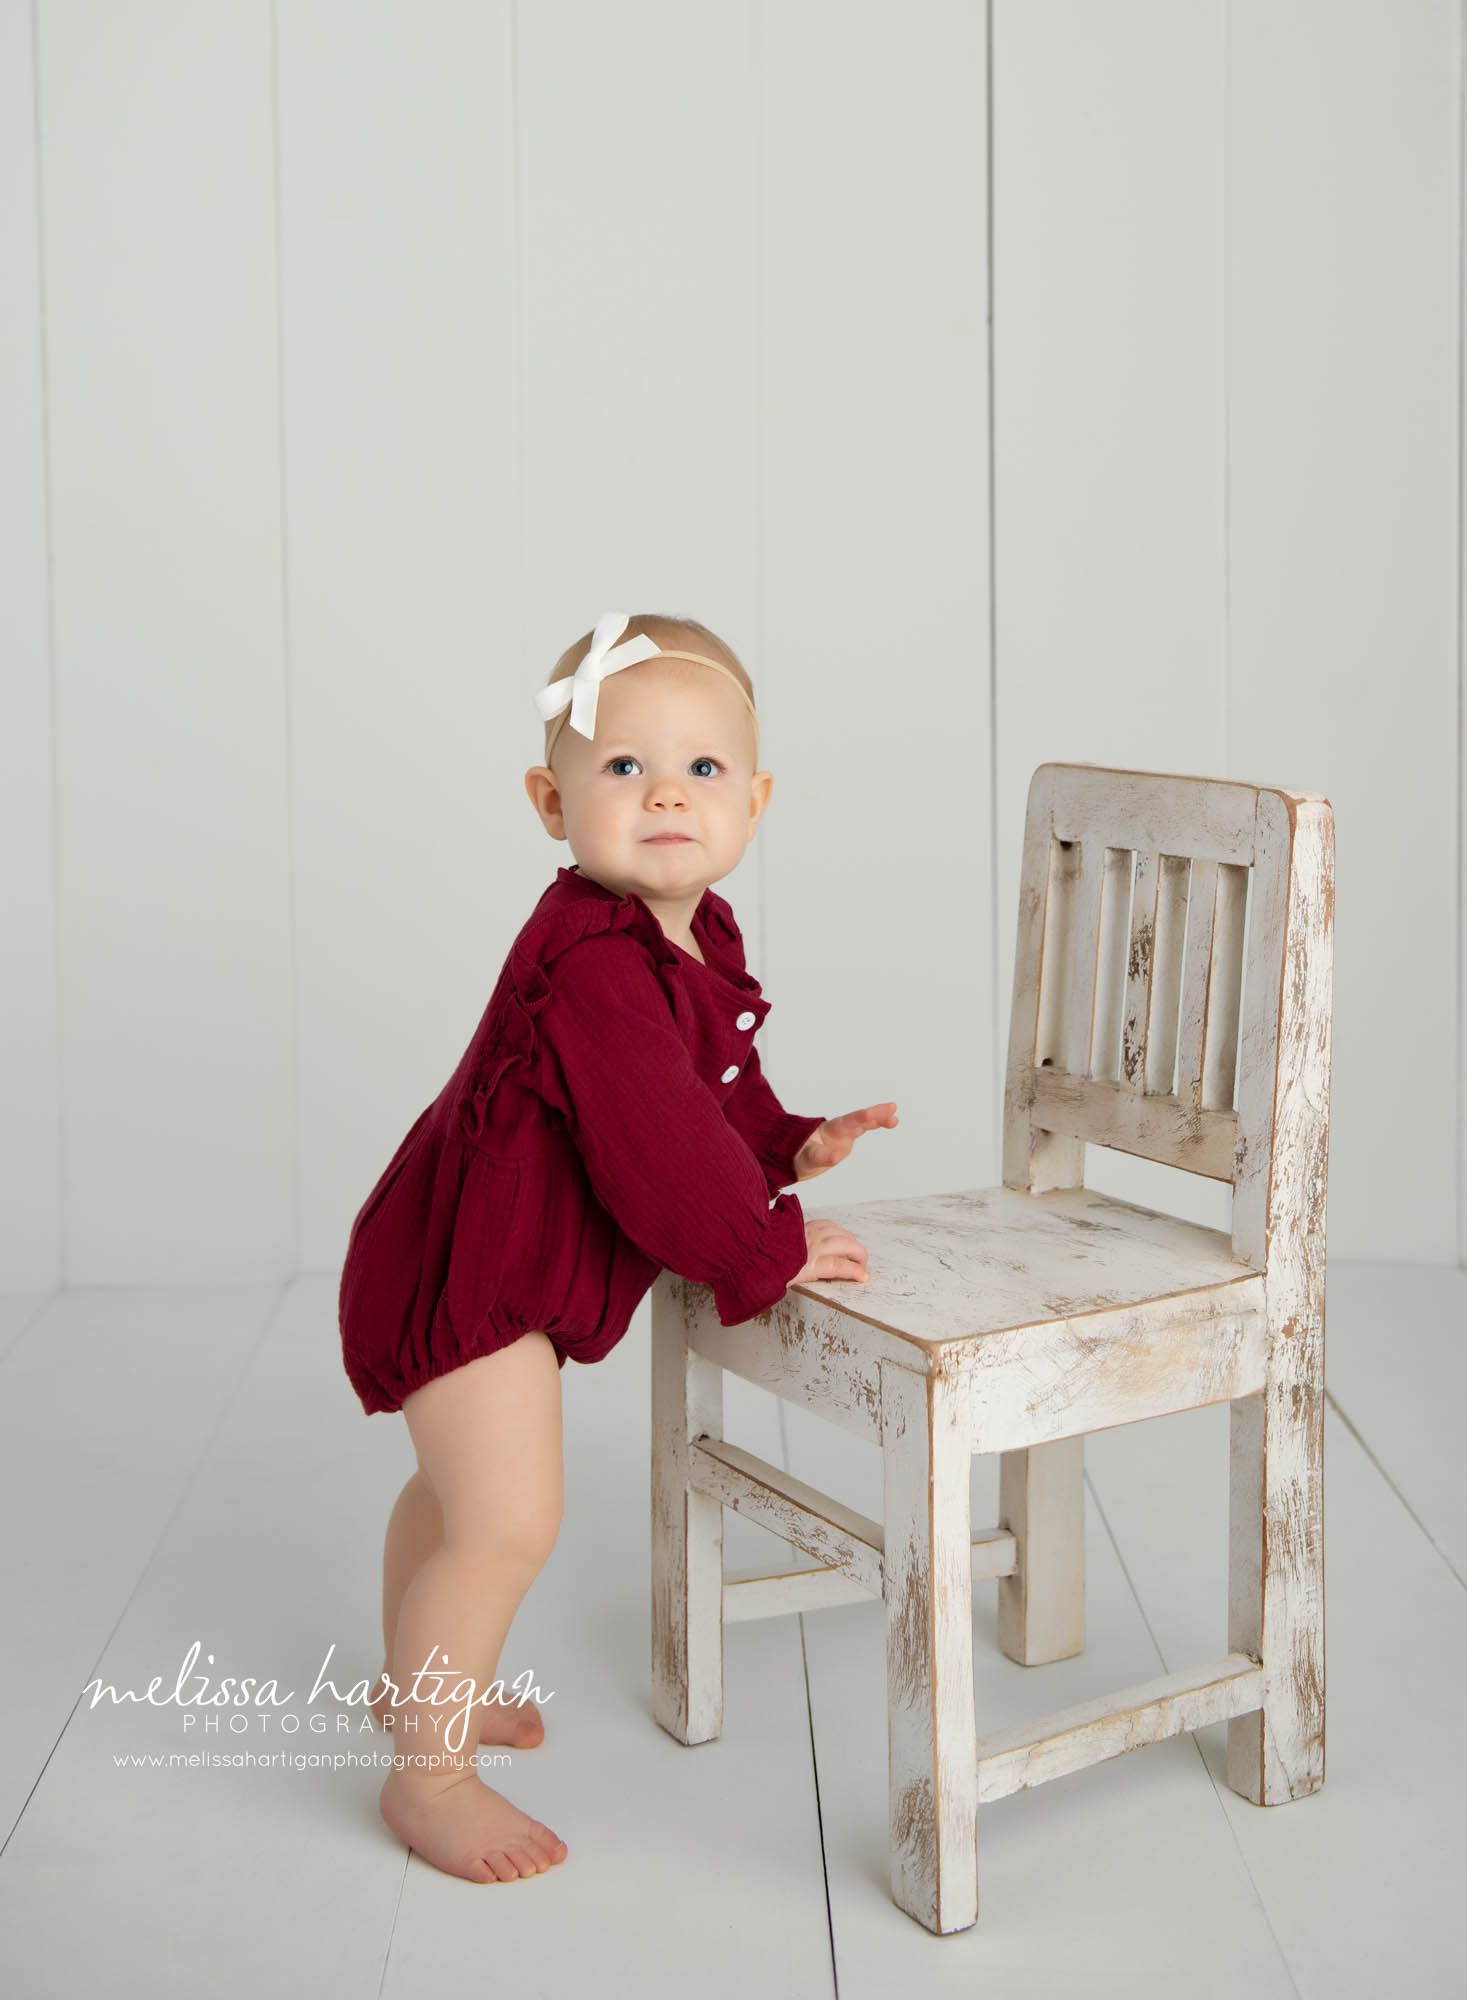 baby girl wearing red outfit and white bow in hair standing at chair milestone photography session